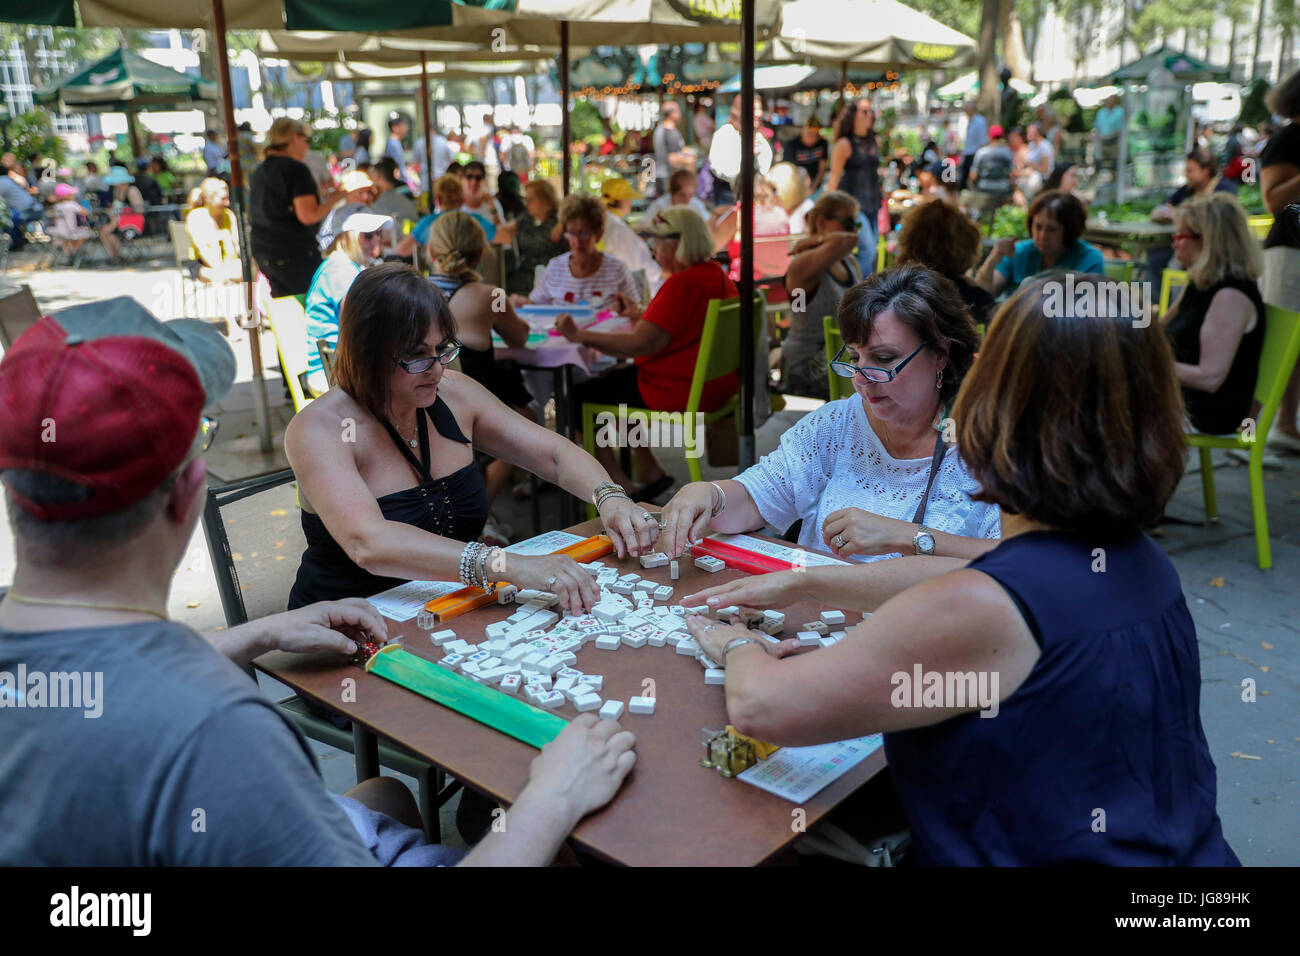 New York, USA. 3rd July, 2017. Hobbyists play Mah Jongg during the 'Mah Jongg Marathon' event at Bryant Park in New York City, the United States, on July 3, 2017. According to event organizer Linda Fisher, the event is organized to provide a place for Mah Jongg hobbyists to communicate with each other and promote the game to more people. Mah Jongg, originated from China, was introduced to the United States in the 1920s. Credit: Wang Ying/Xinhua/Alamy Live News Stock Photo